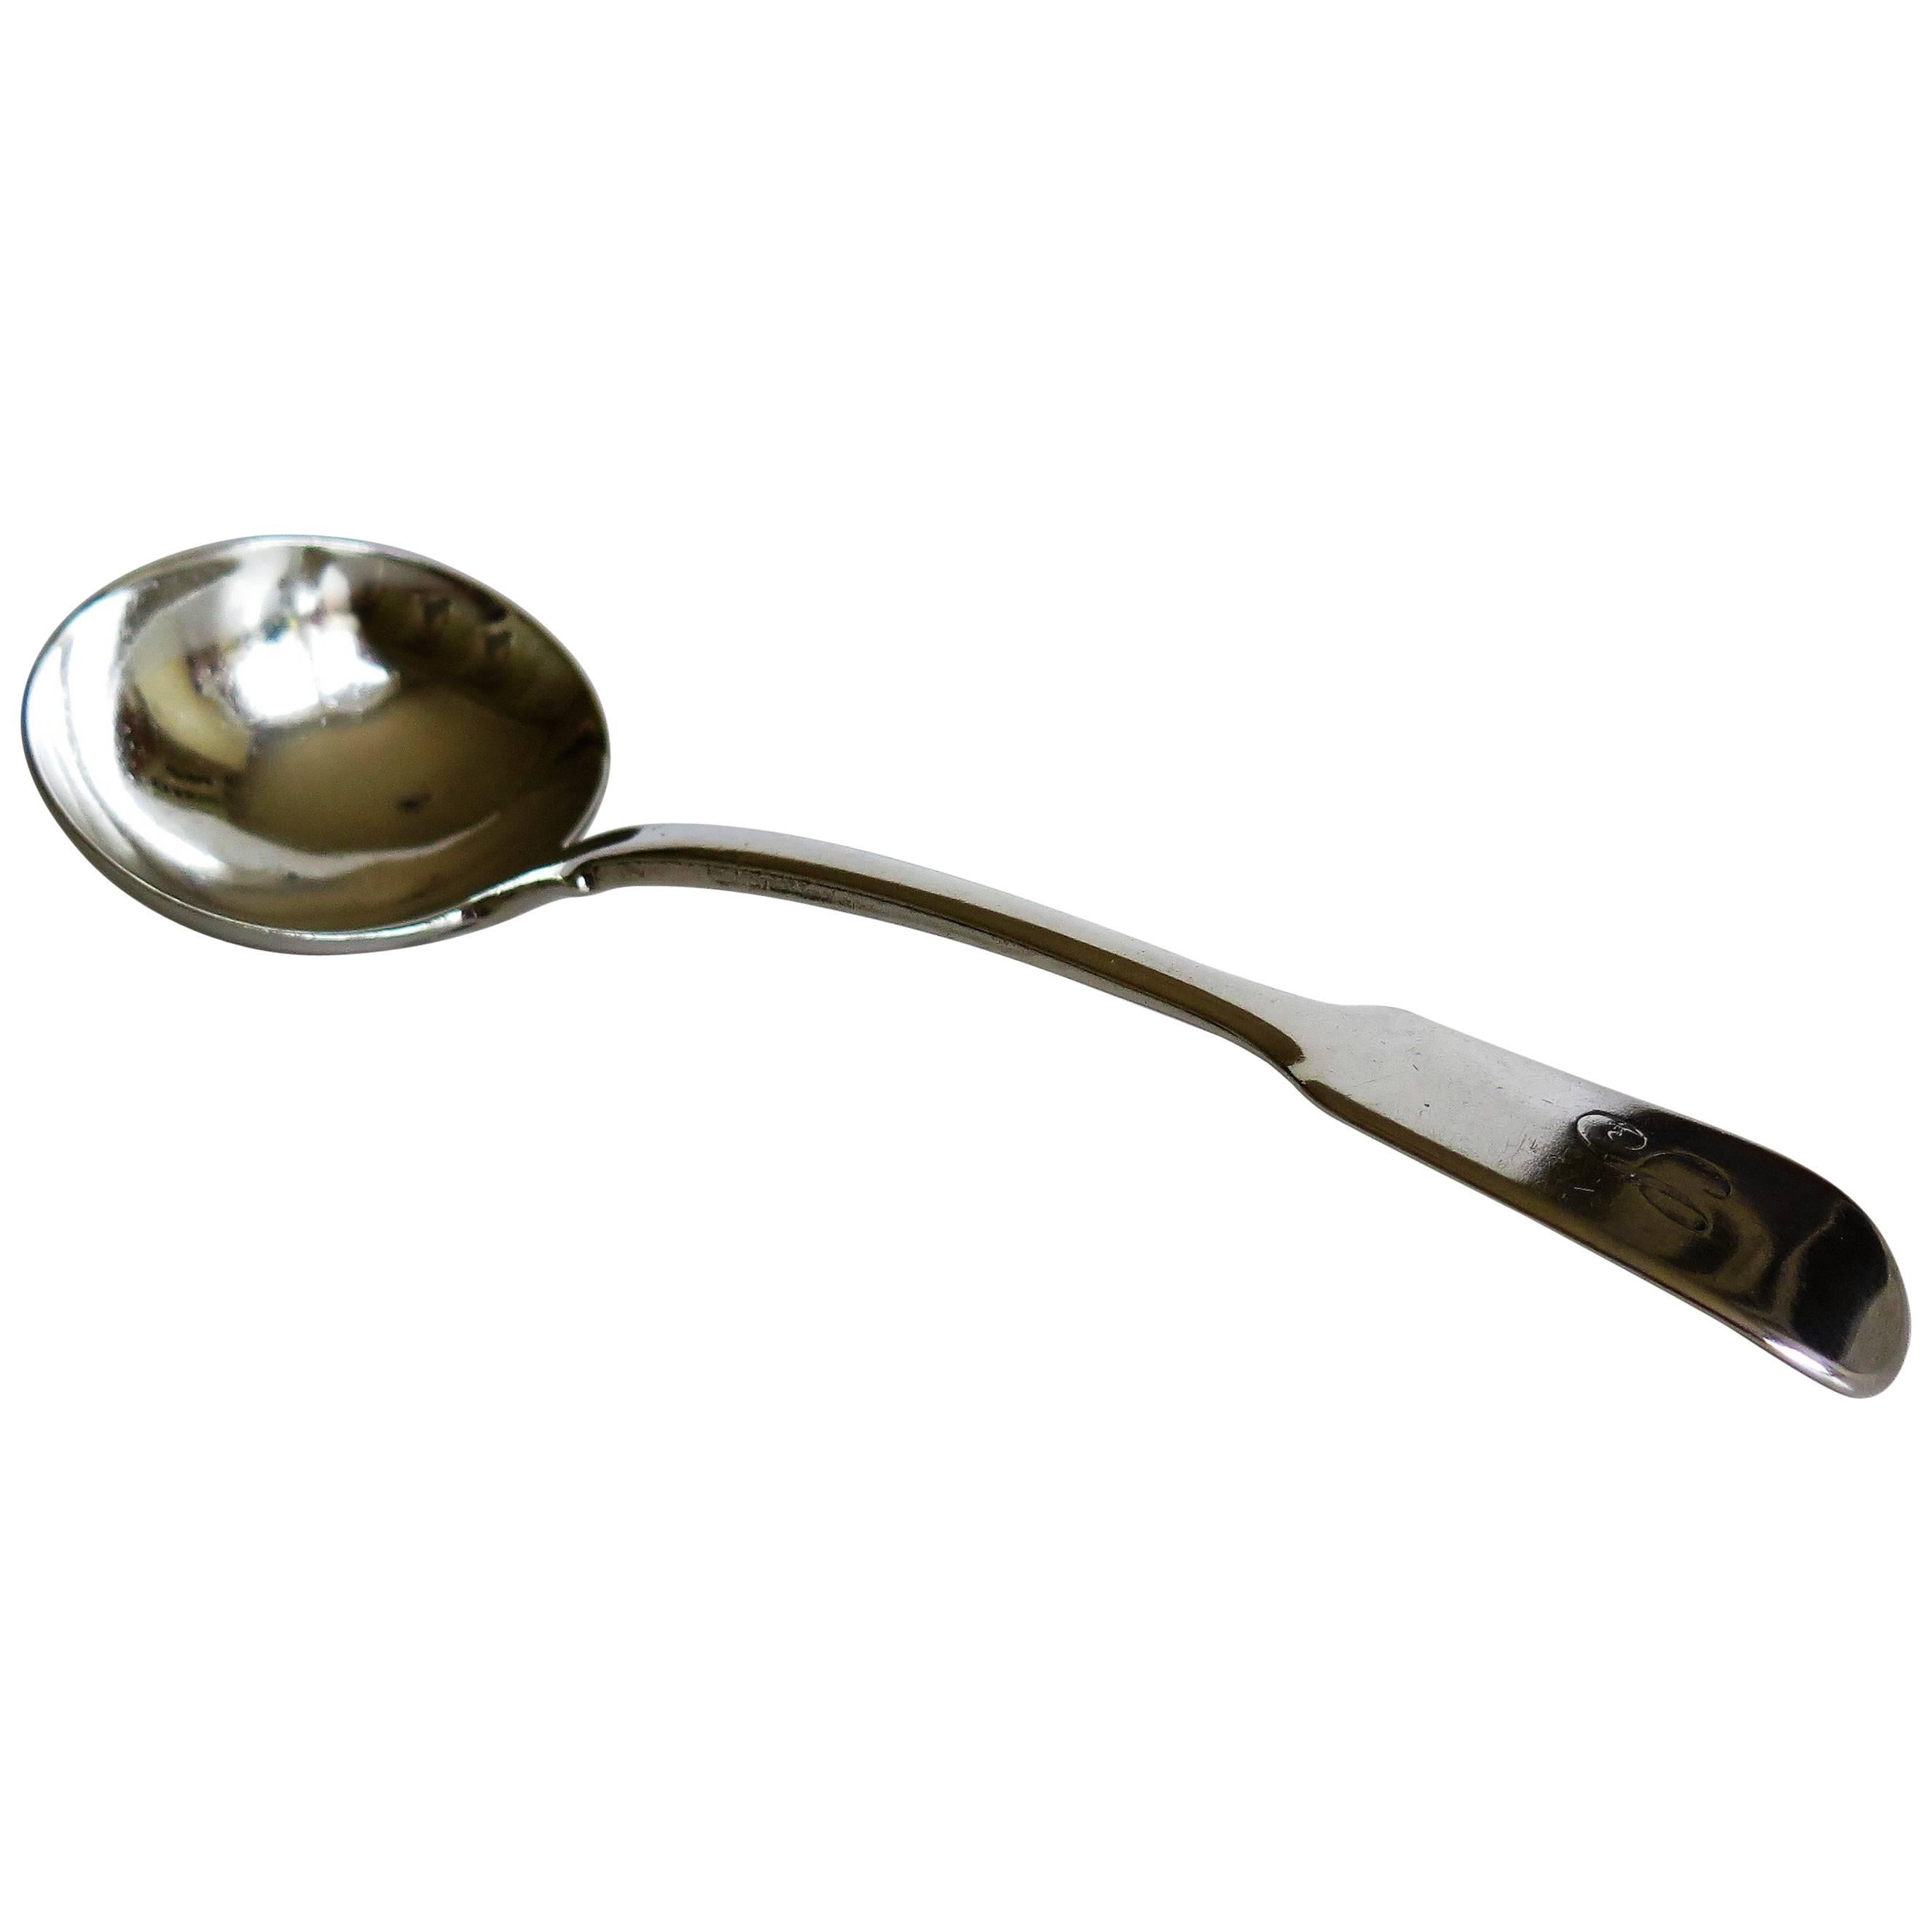 Sterling Silver Sauce Ladle or Fiddle-Back Spoon by Charles Boyton, London 1838